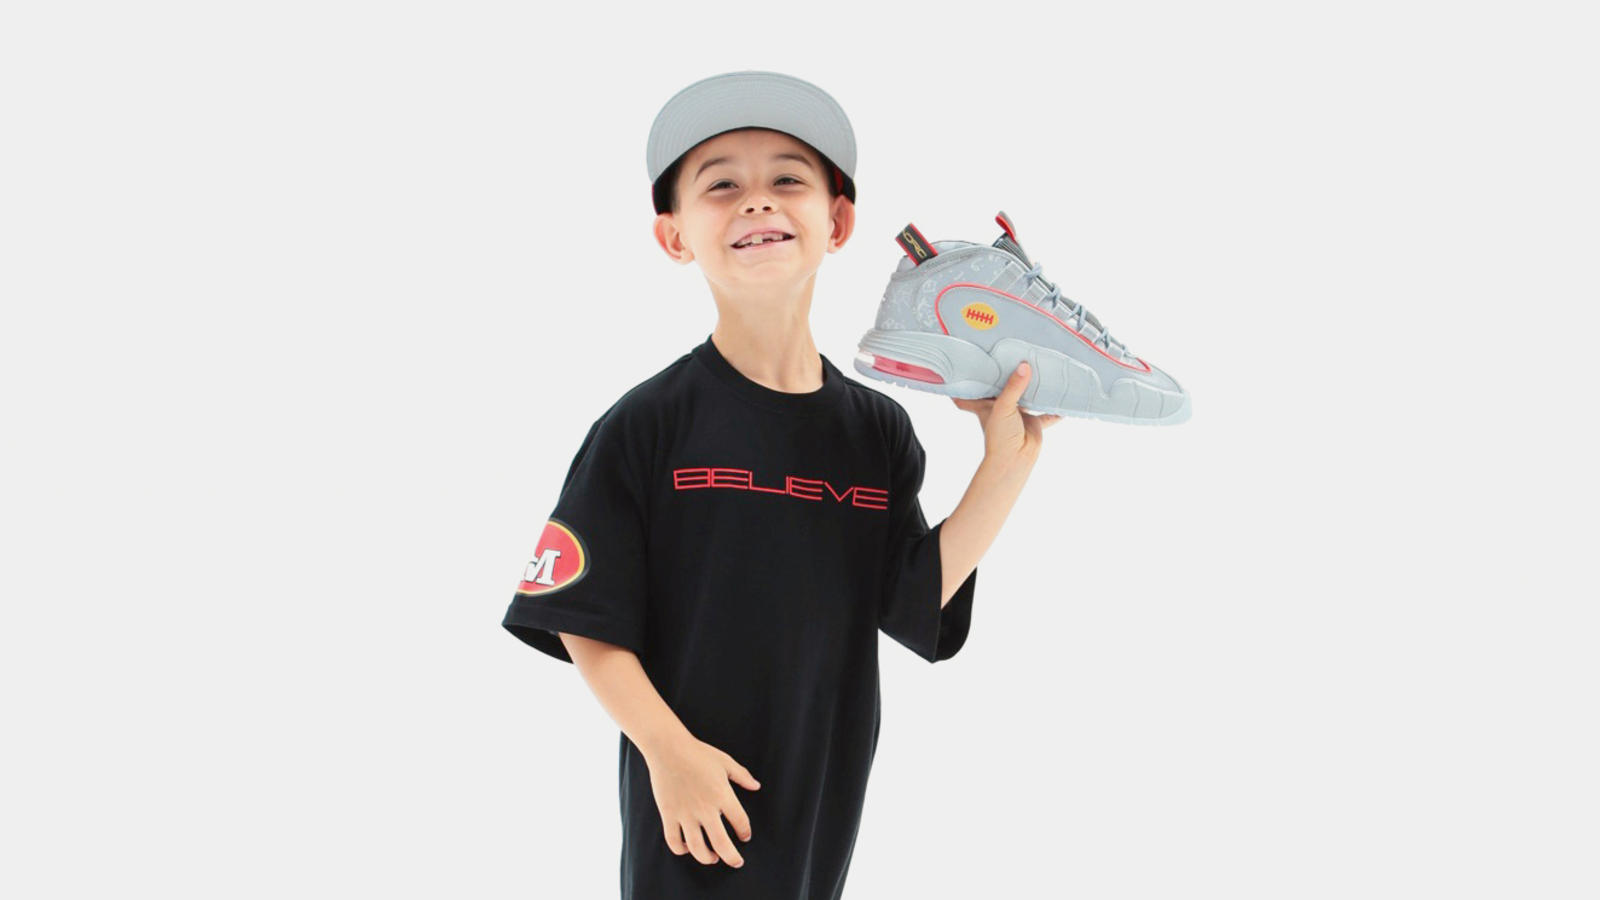 Nike Air Max Penny 1 Doernbecher by 